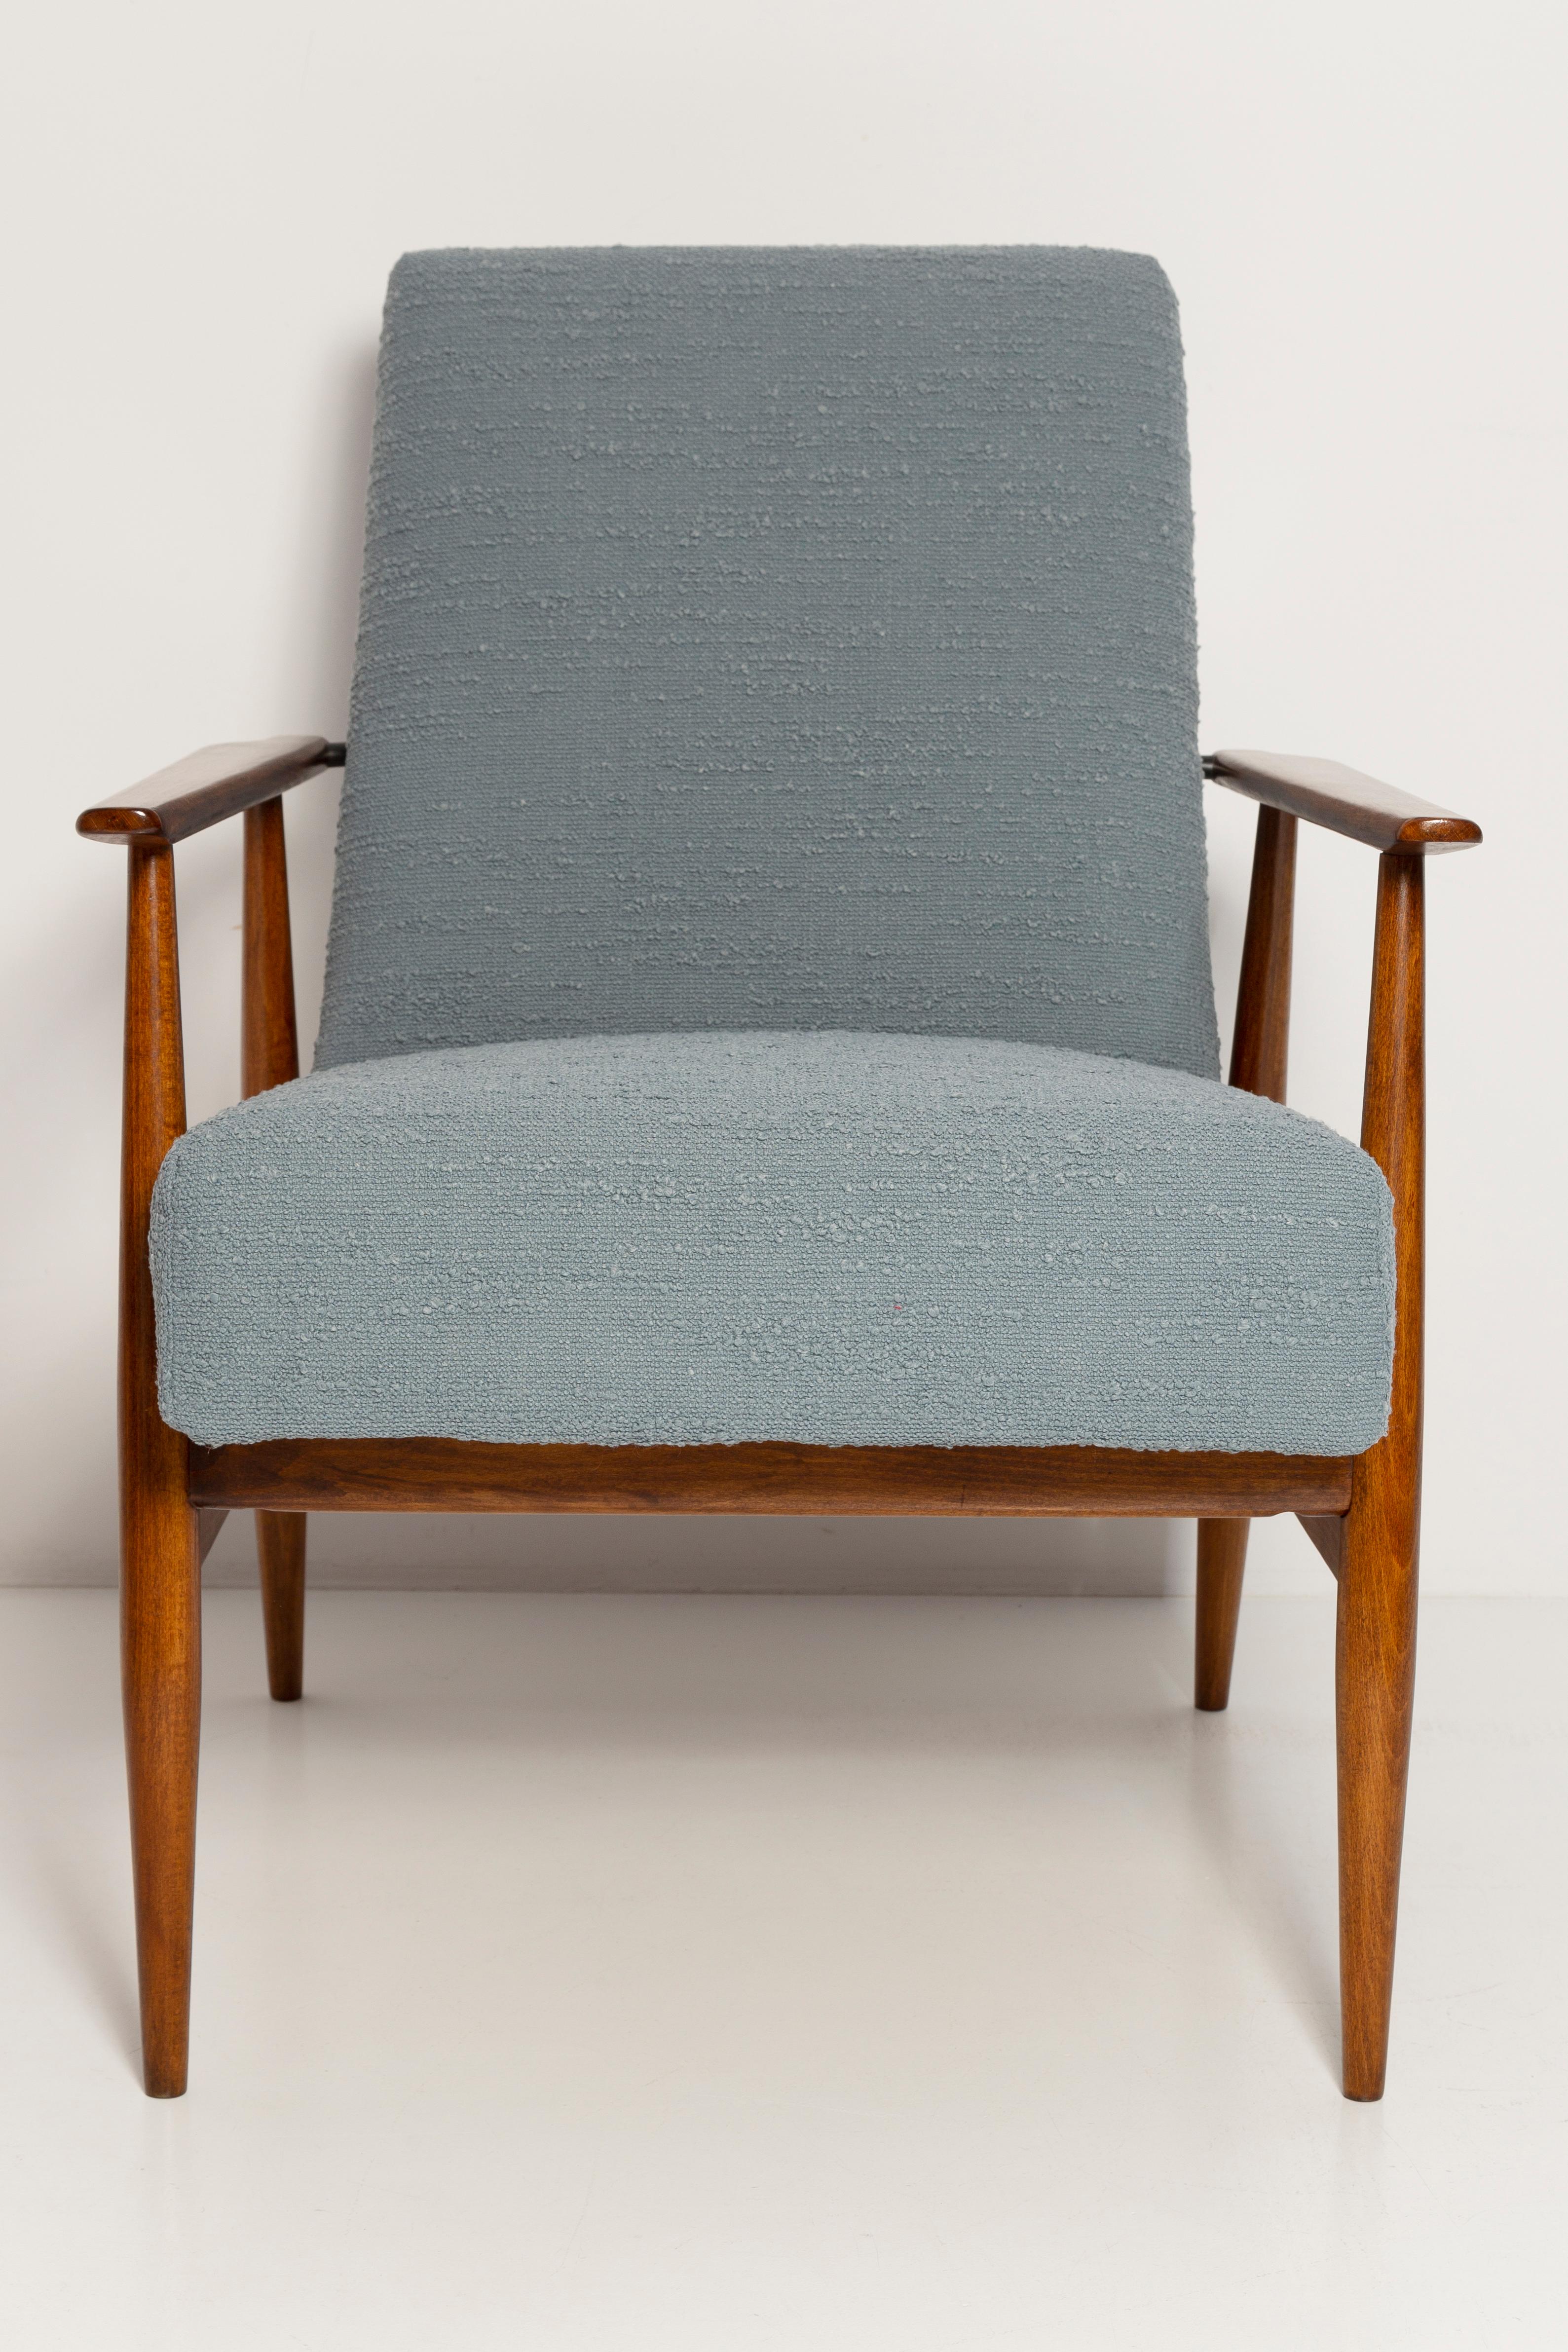 Set of Two Mid-Century Gray Blue Boucle Dante Armchairs, H. Lis, 1960s For Sale 4